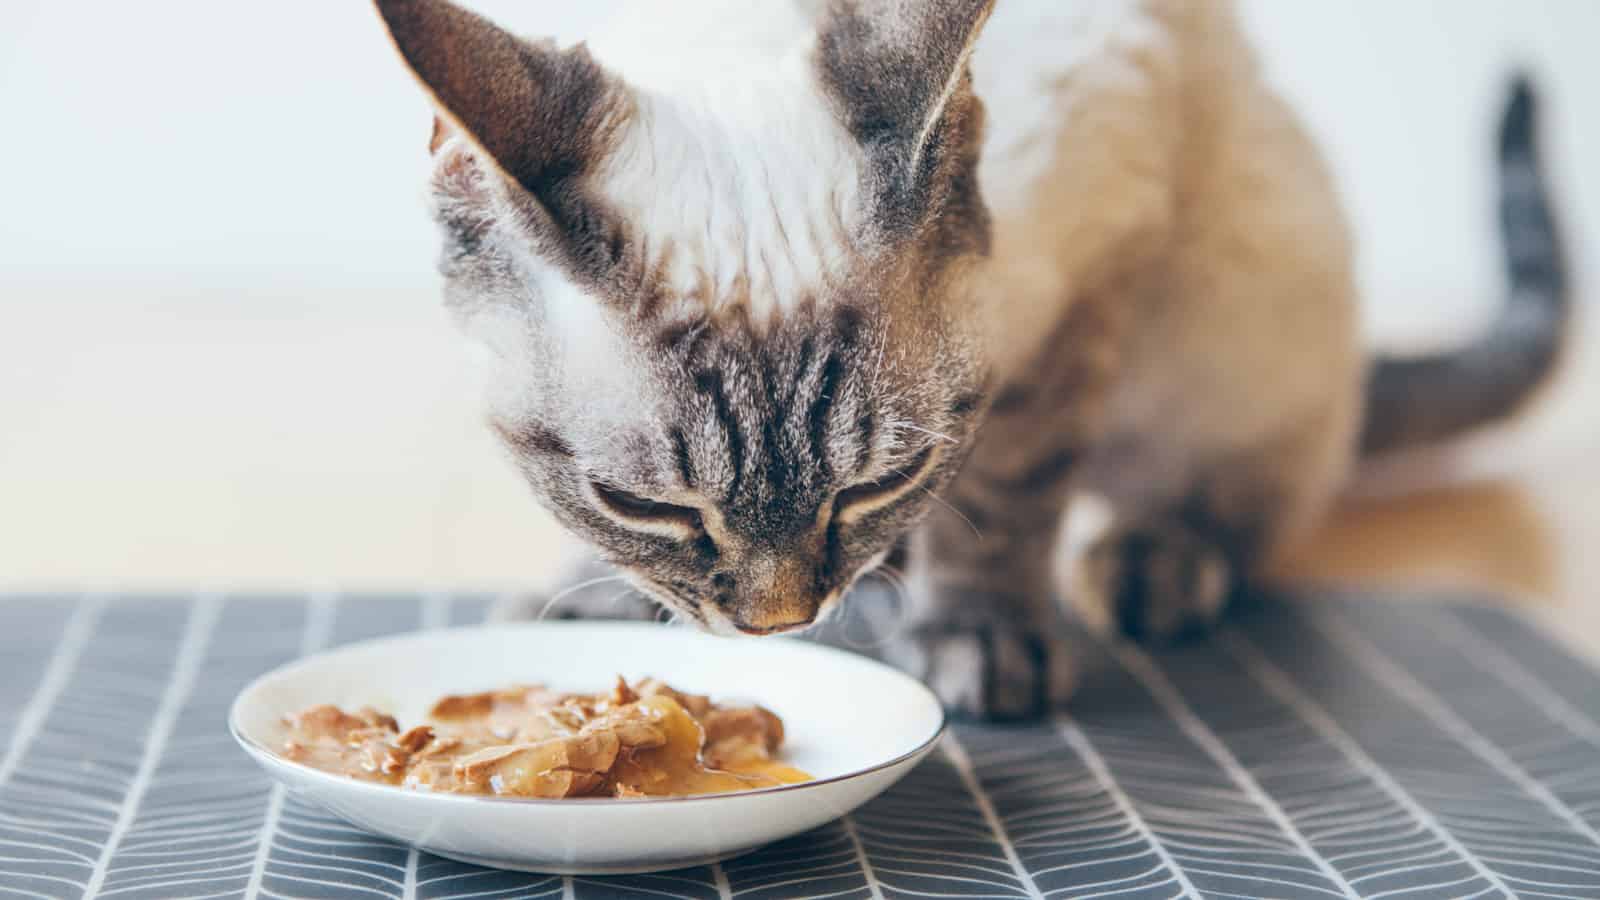 Close-up of a tabby cat eating canned cat food from white ceramic plate placed on the floor